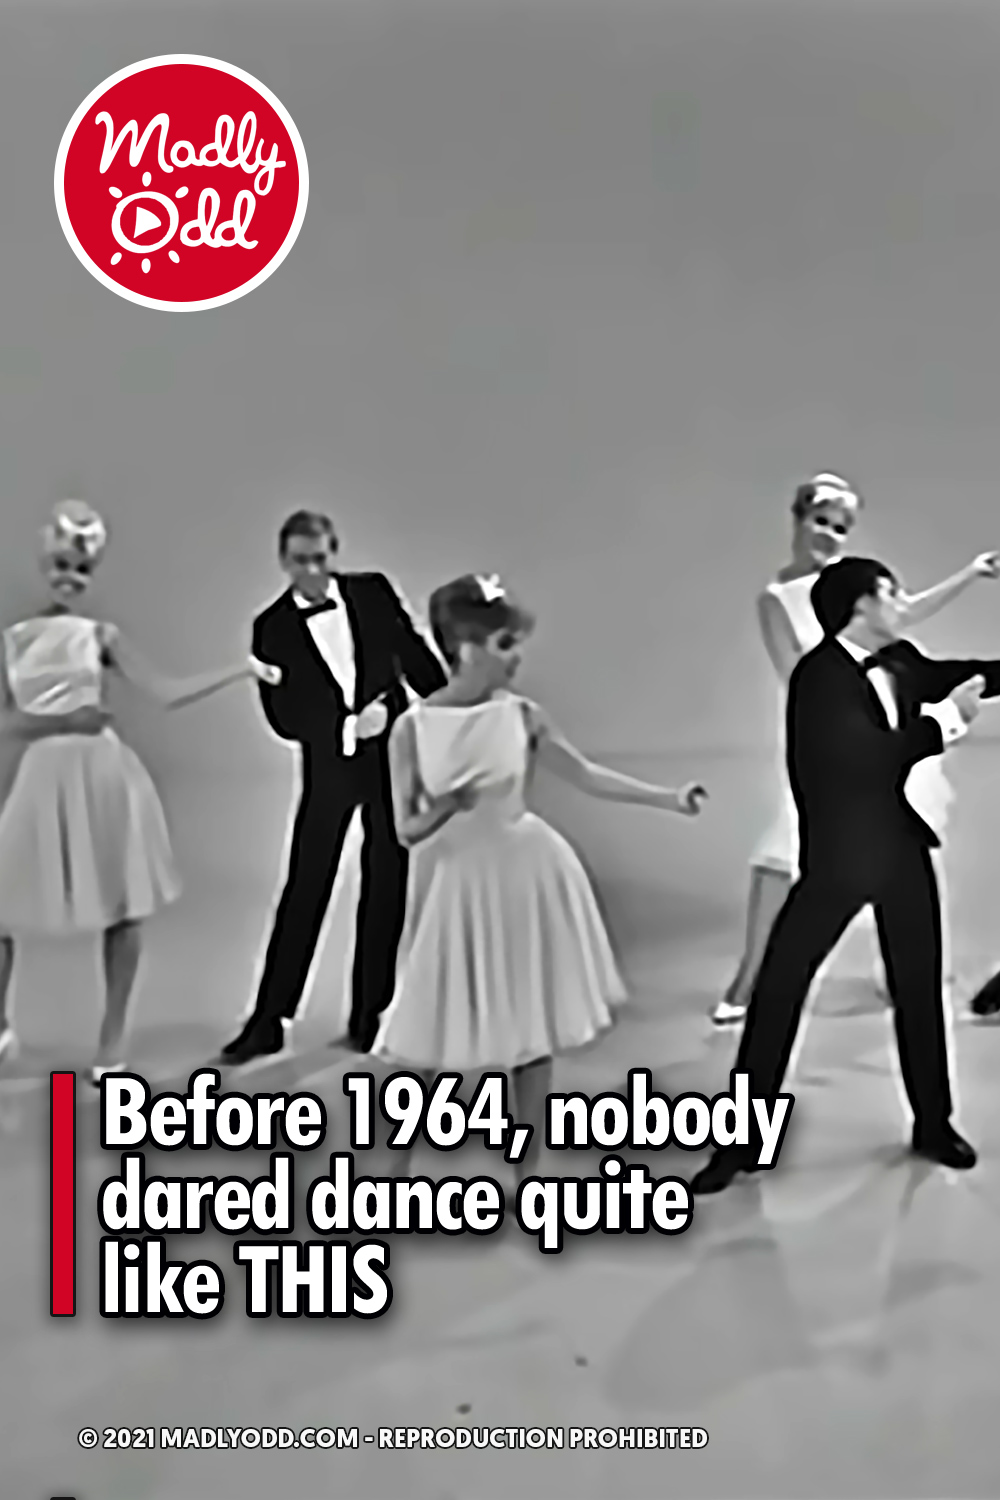 Before 1964, nobody dared dance quite like THIS